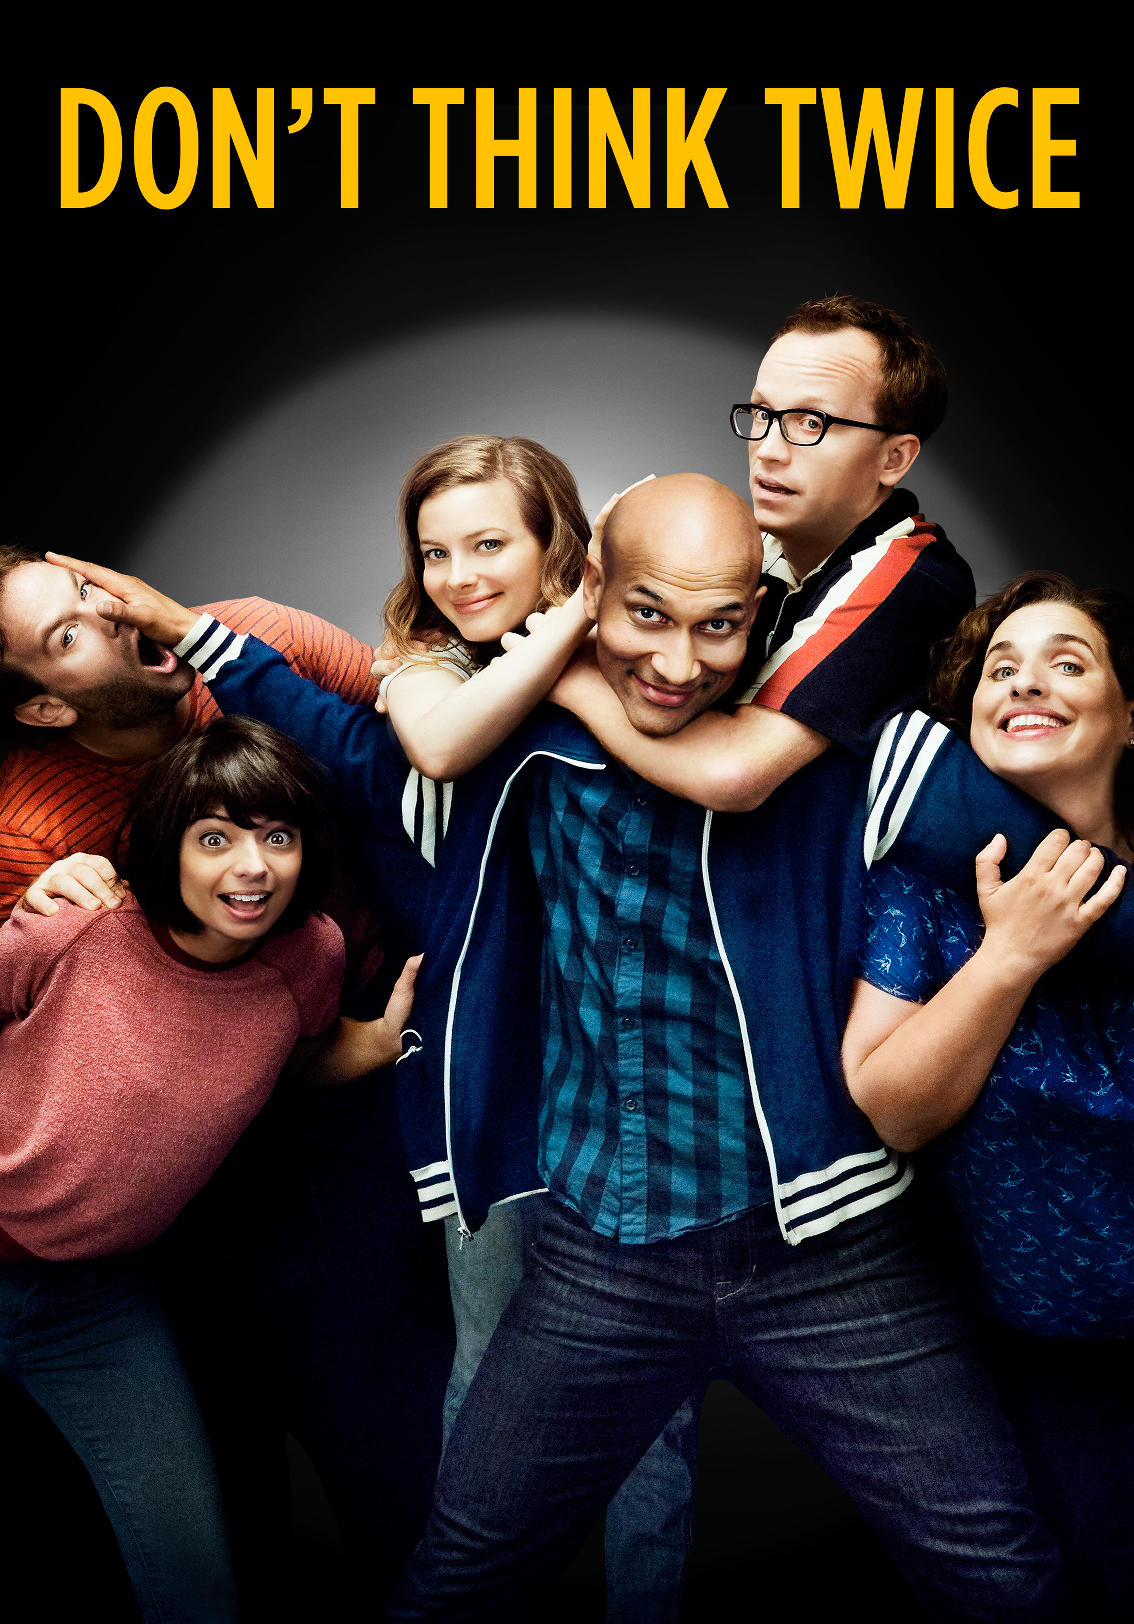 Don't think twice 2016